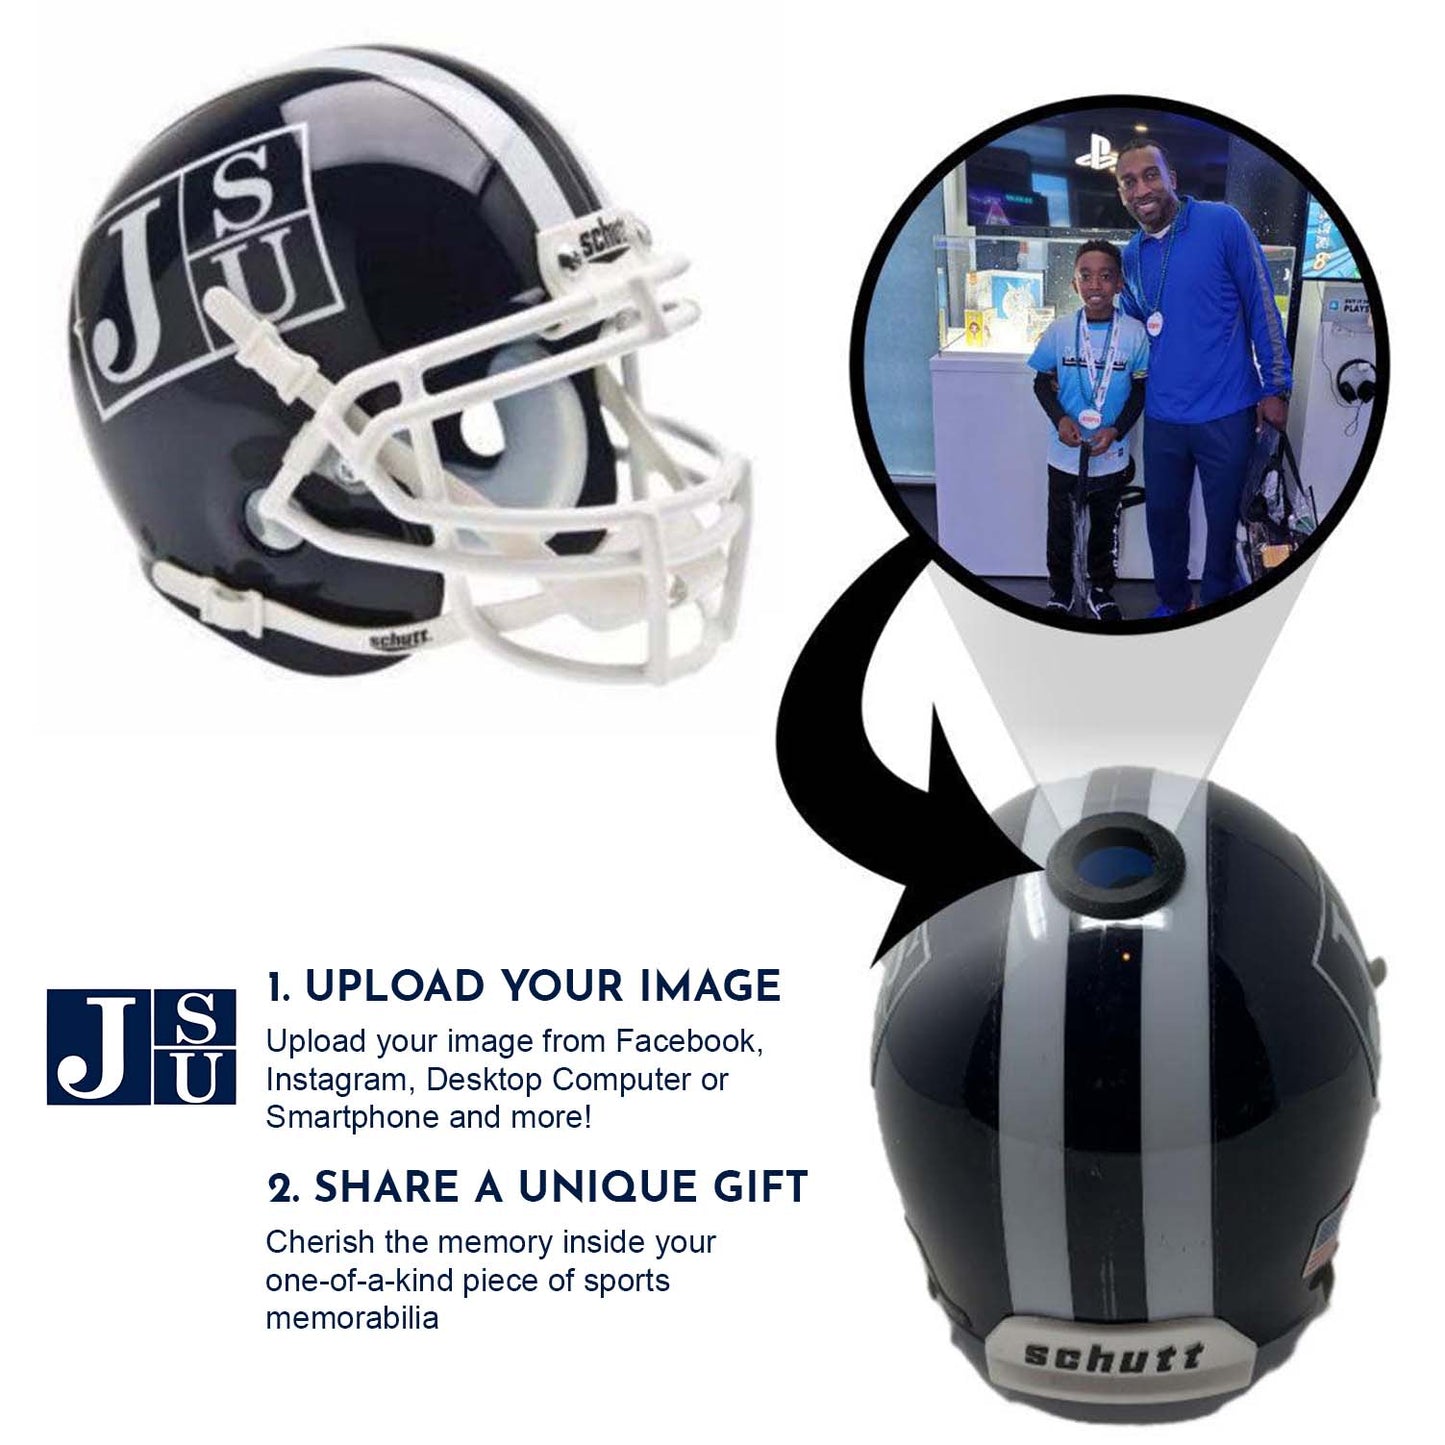 Jackson State Tigers College Football Collectible Schutt Mini Helmet - Picture Inside